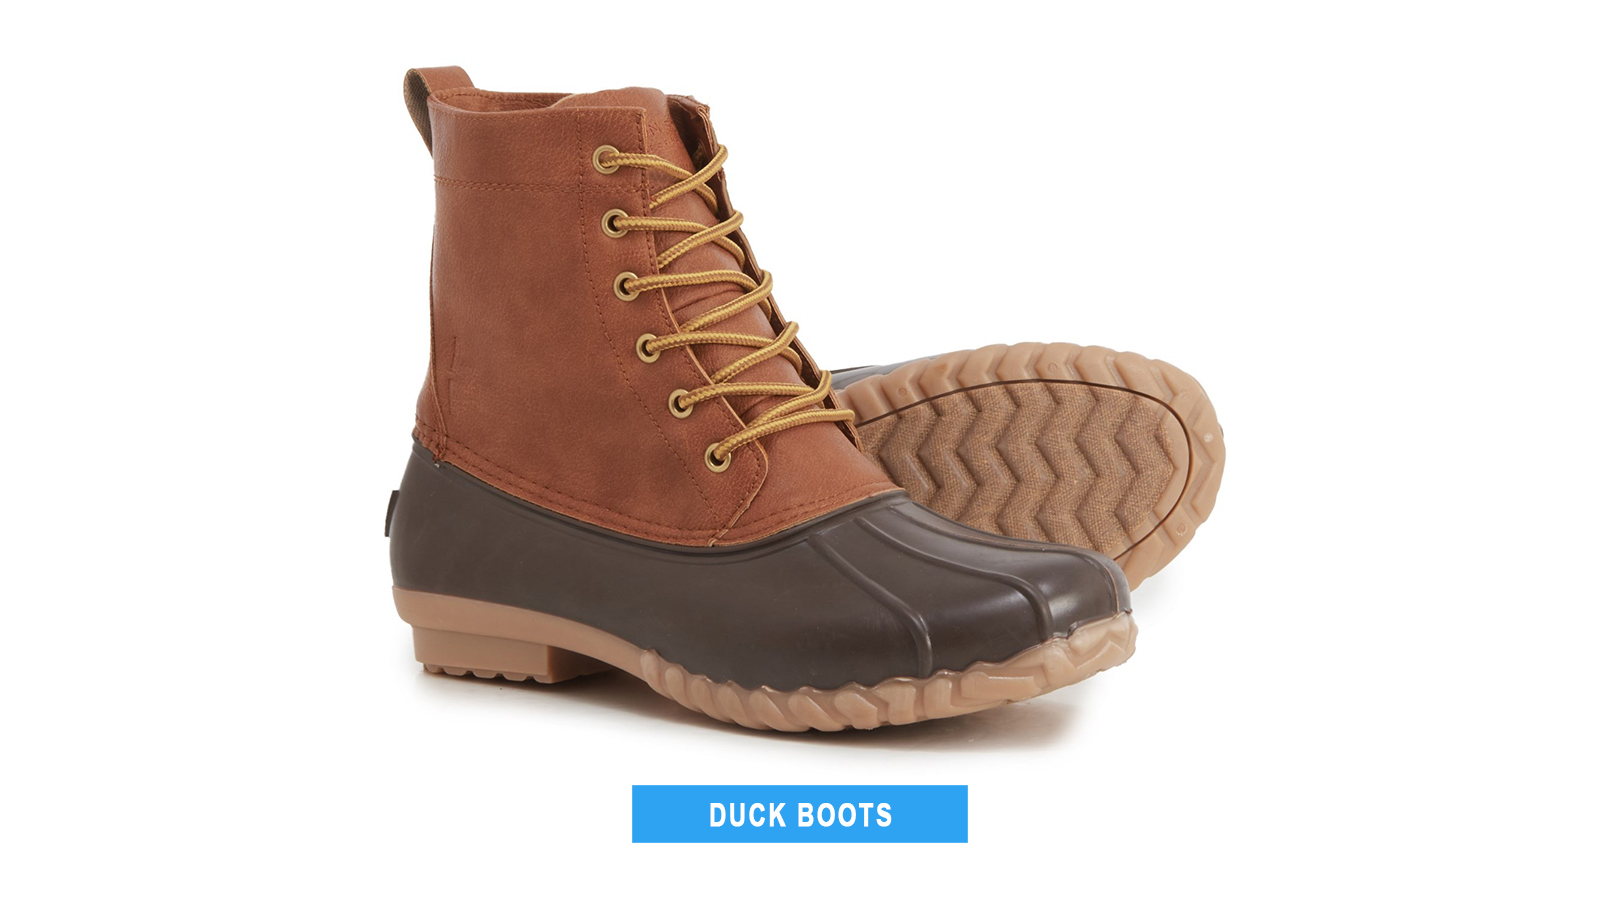 duck boots style